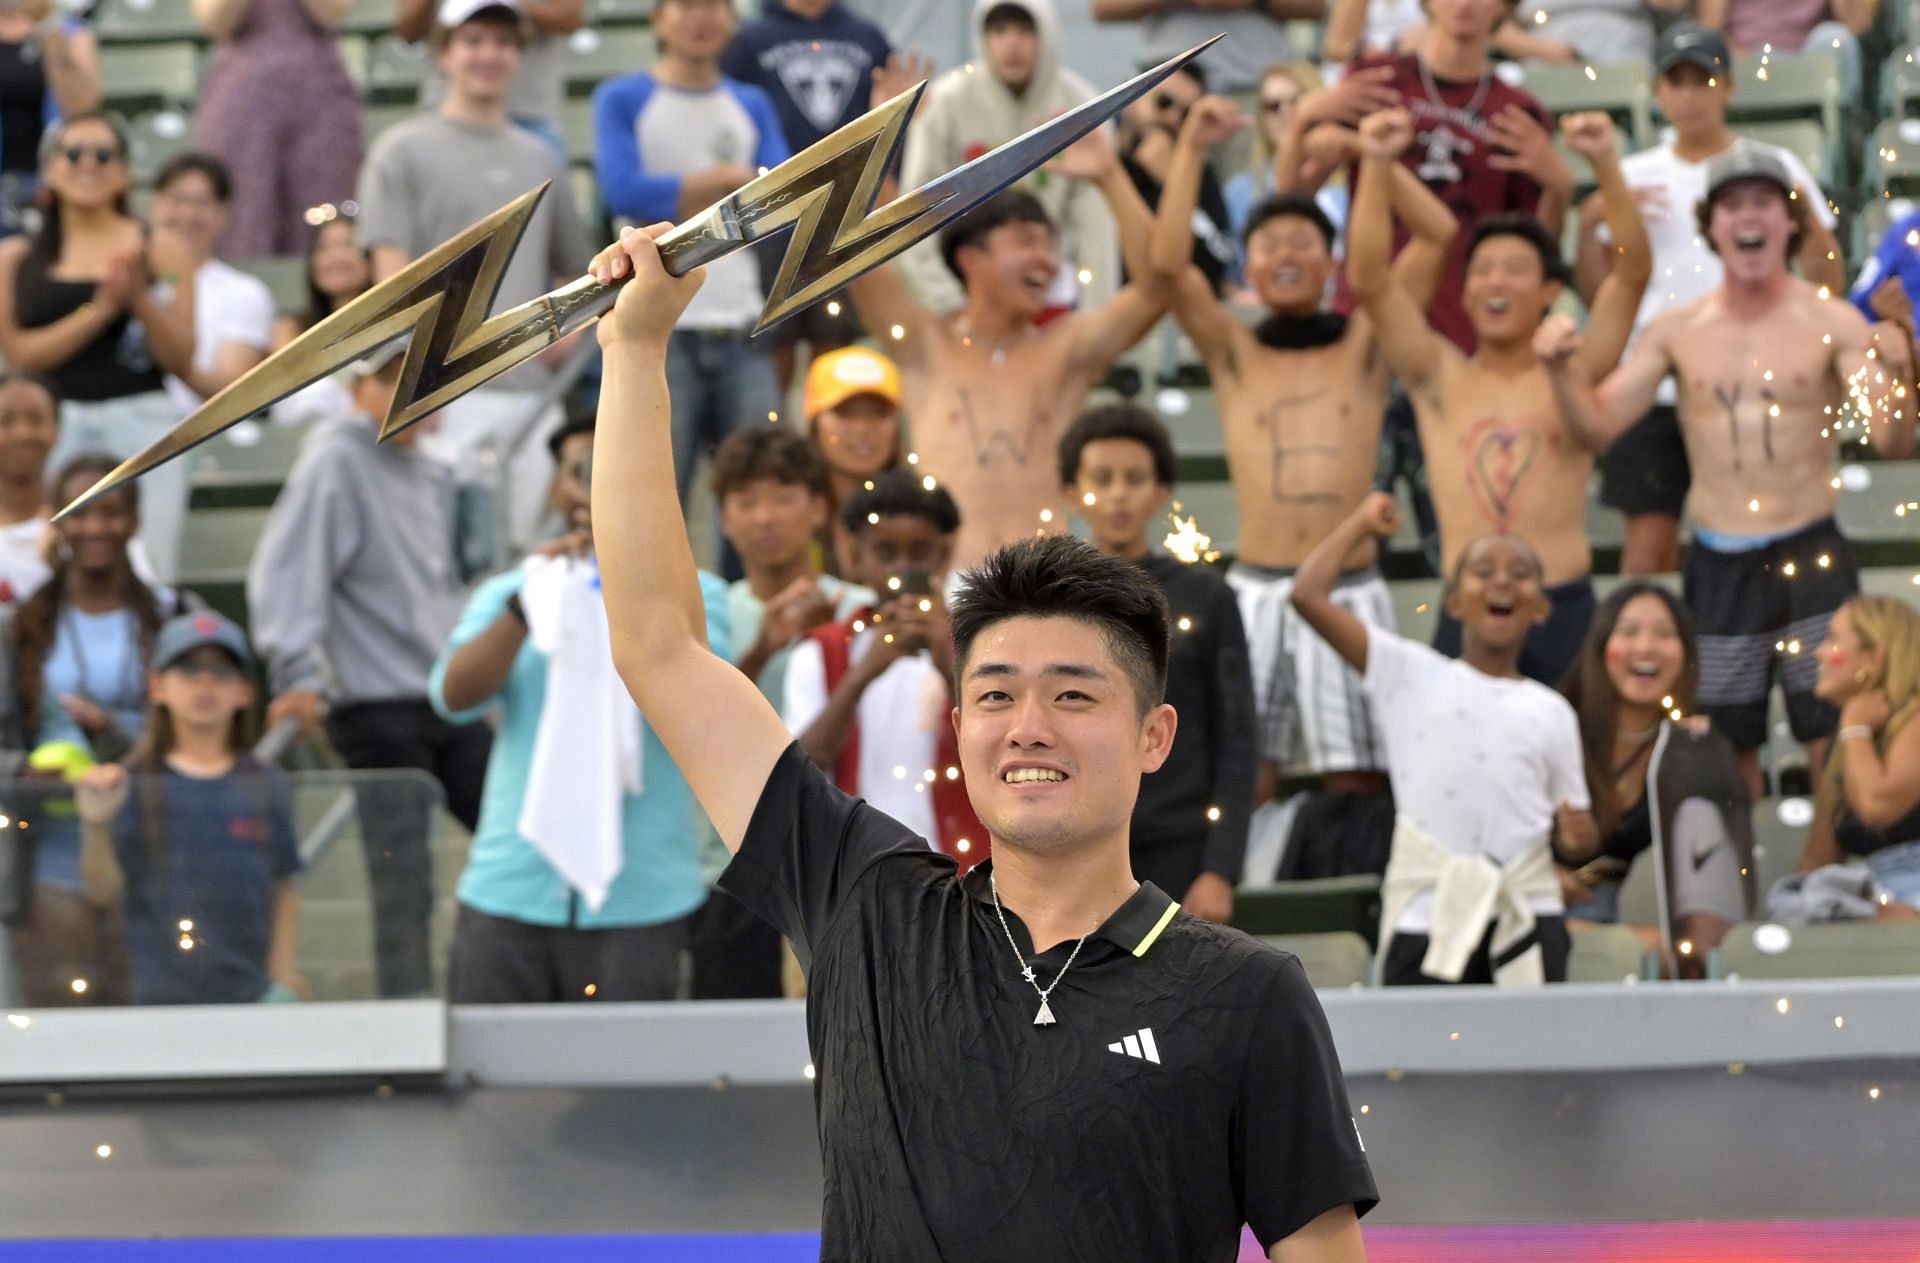 Yibing Wu lifts the Ultimate Tennis Showdown trophy in Los Angeles.